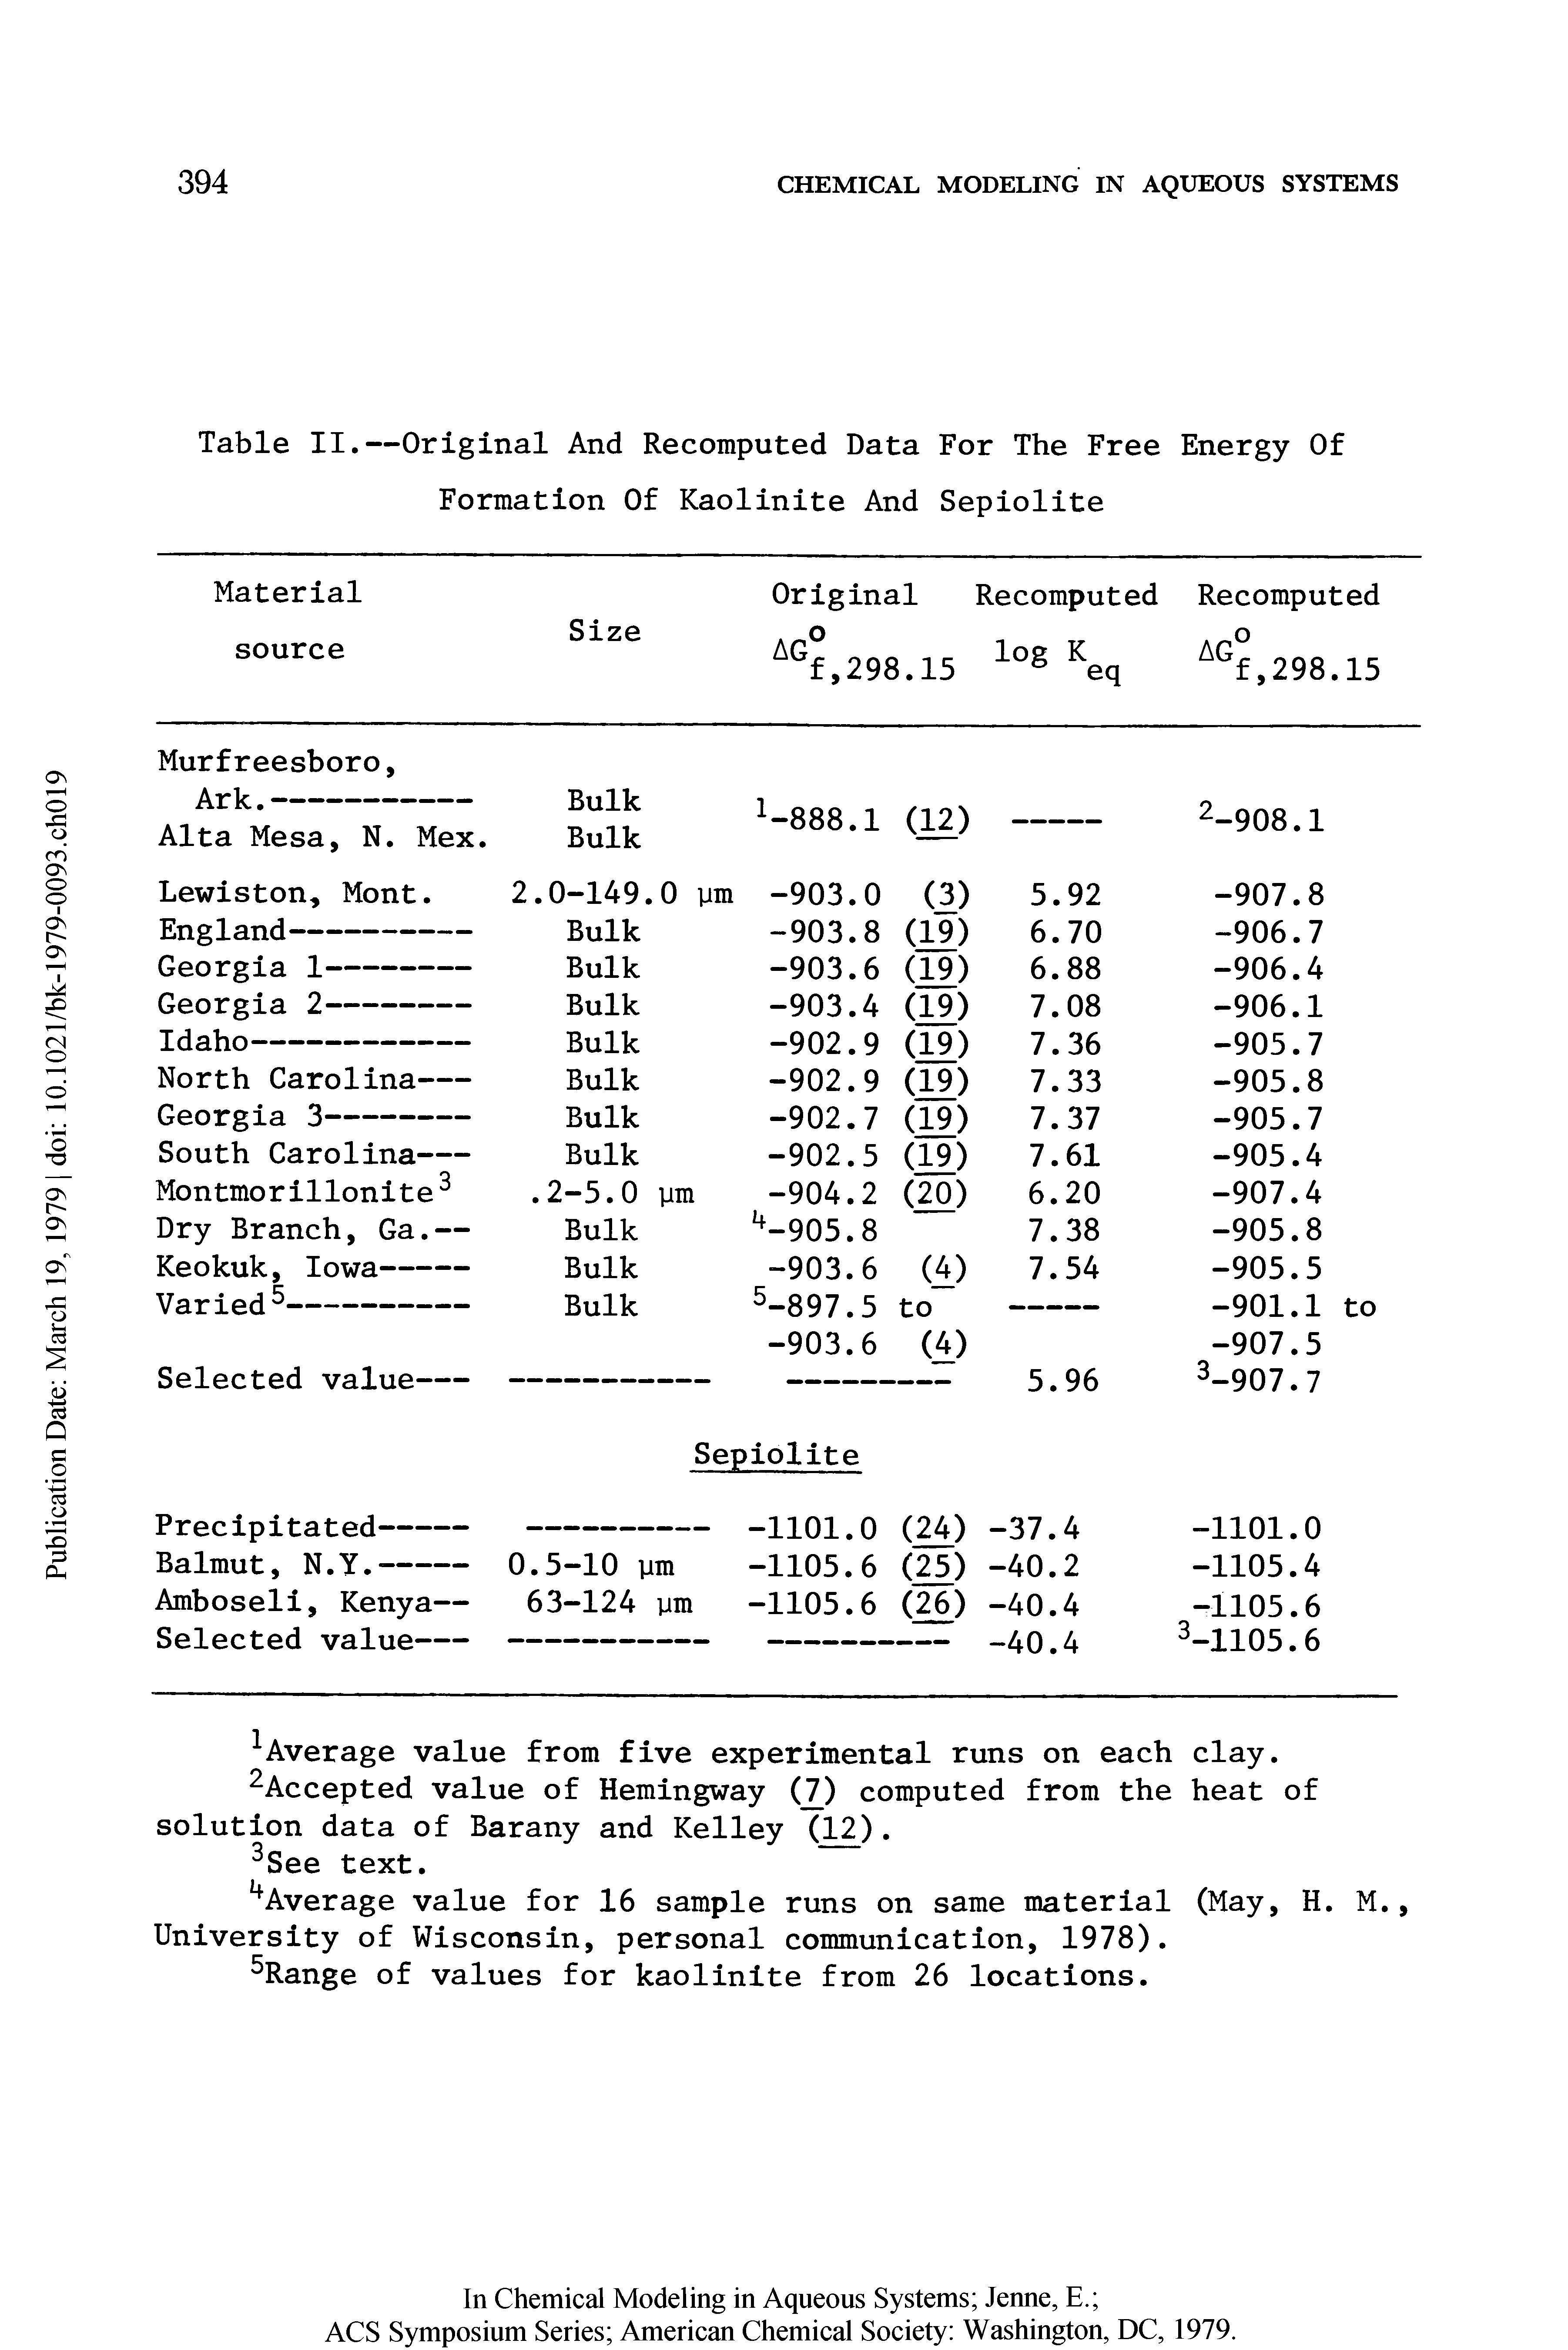 Table II.—Original And Recomputed Data For The Free Energy Of Formation Of Kaolinite And Sepiolite...